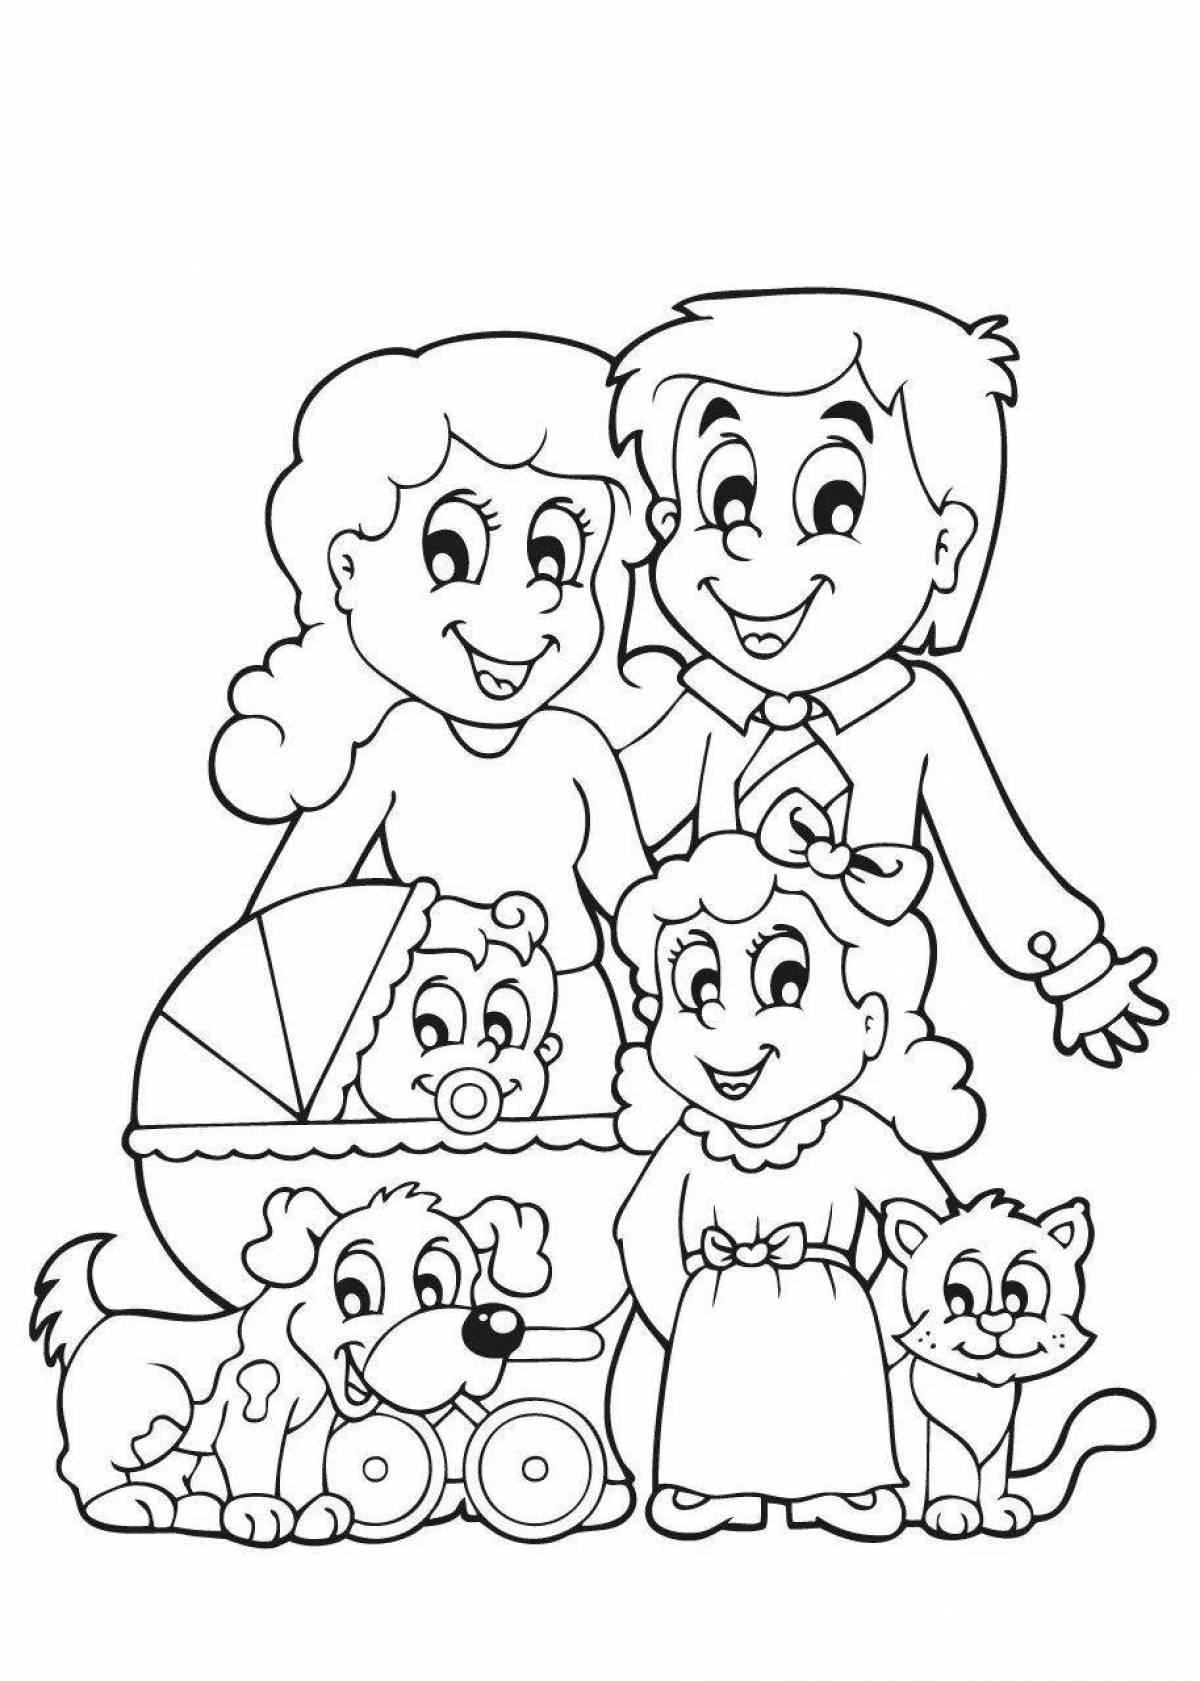 Amazing coloring page my family